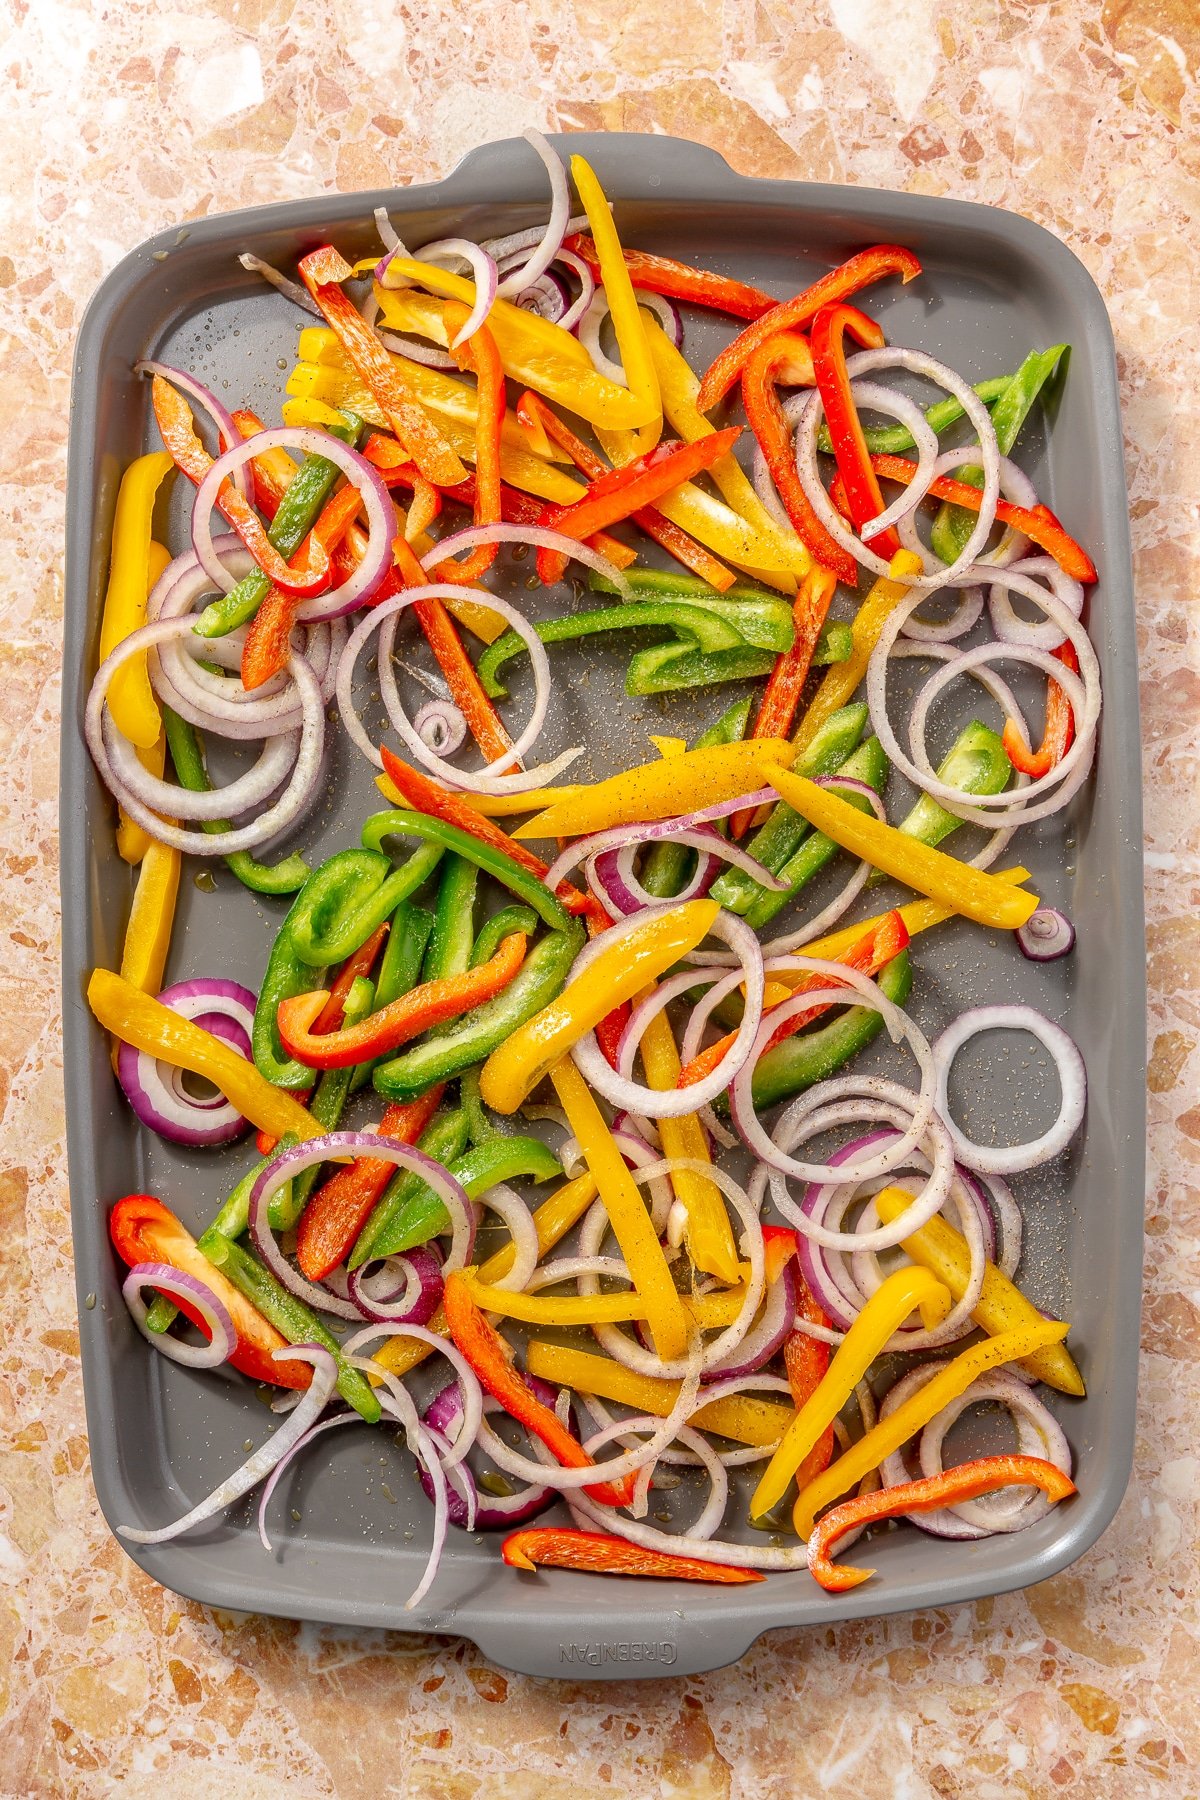 Chopped red, yellow, and orange bell peppers and sliced purple onion sit on a baking tray.